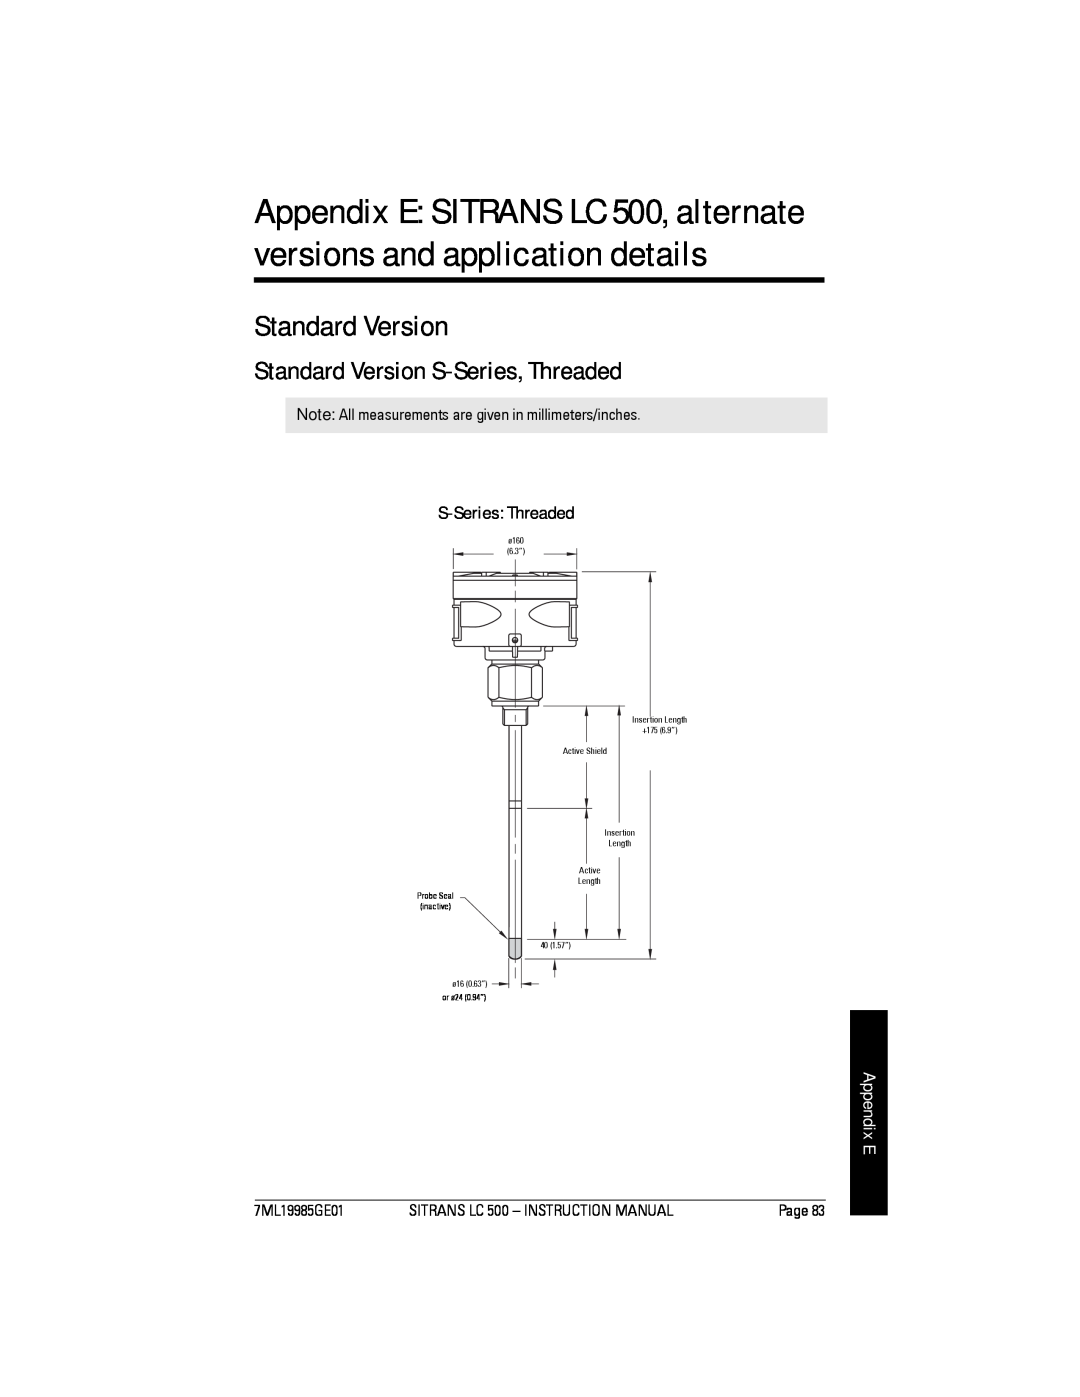 Siemens Sitrans, LC 500 instruction manual Standard Version S-Series, Threaded, Appendix E, Page 